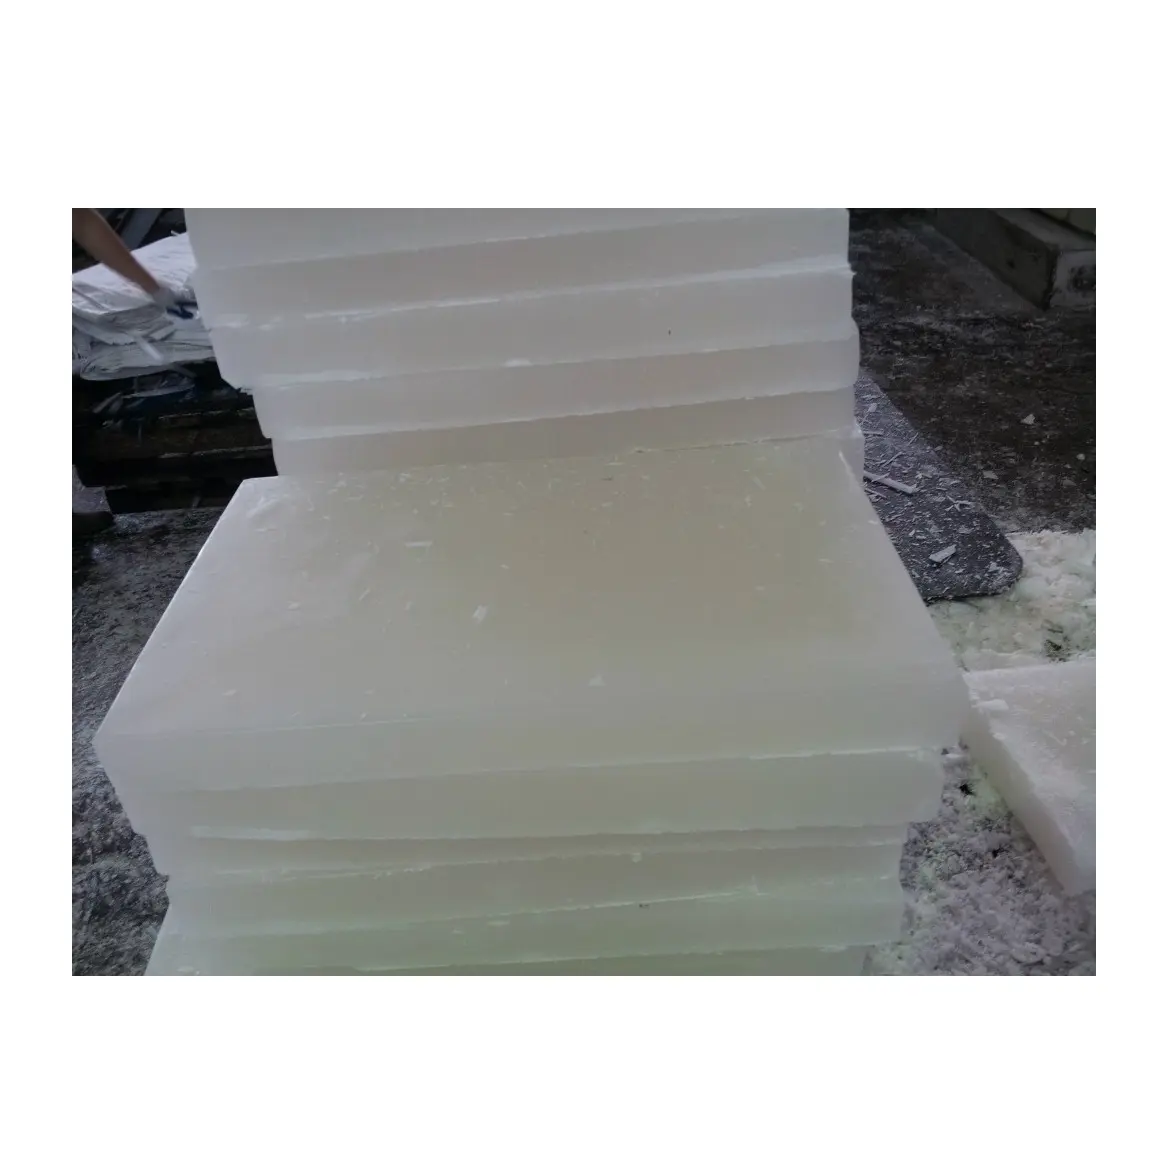 Factory direct sales 56-58 Fully Refined Clear Crude Candle Paraffin Wax